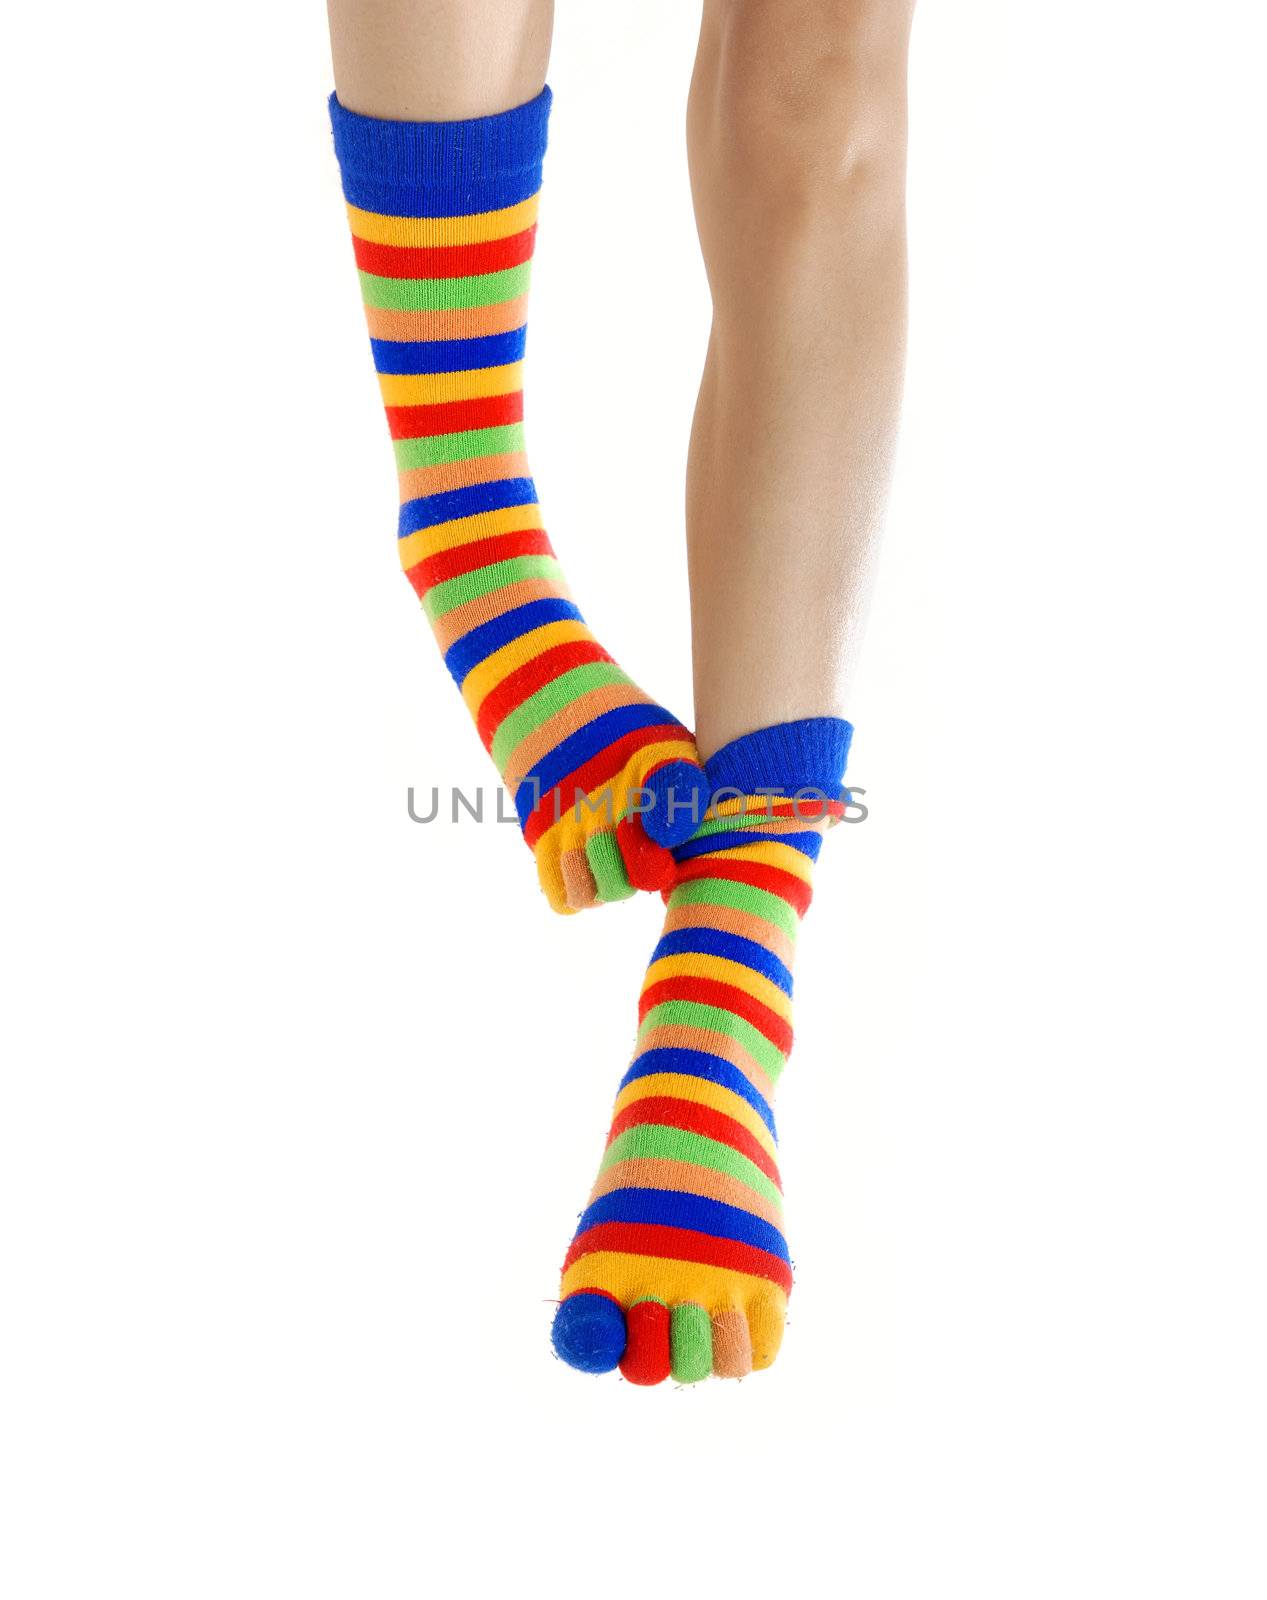 Thin legs in colored socks scratching each other